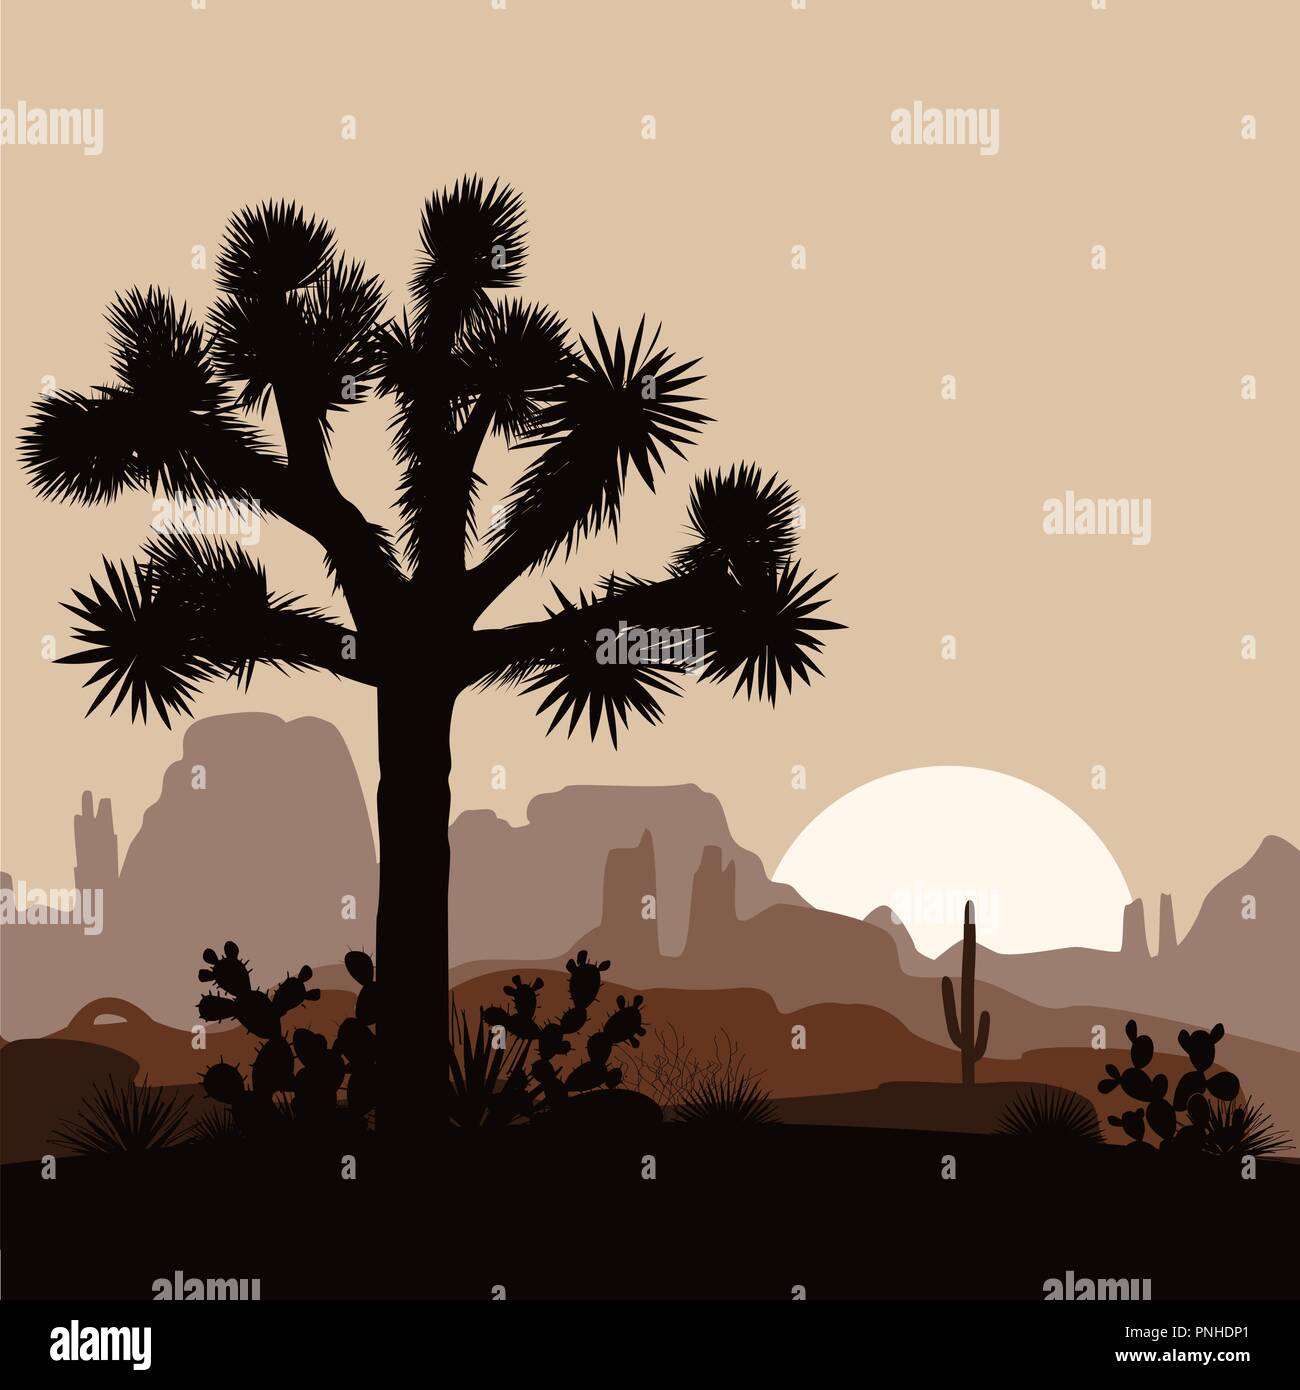 Morning landscape with Joshua tree, prickly pear, and mountains over sunrise. Vector illustration. Stock Vector